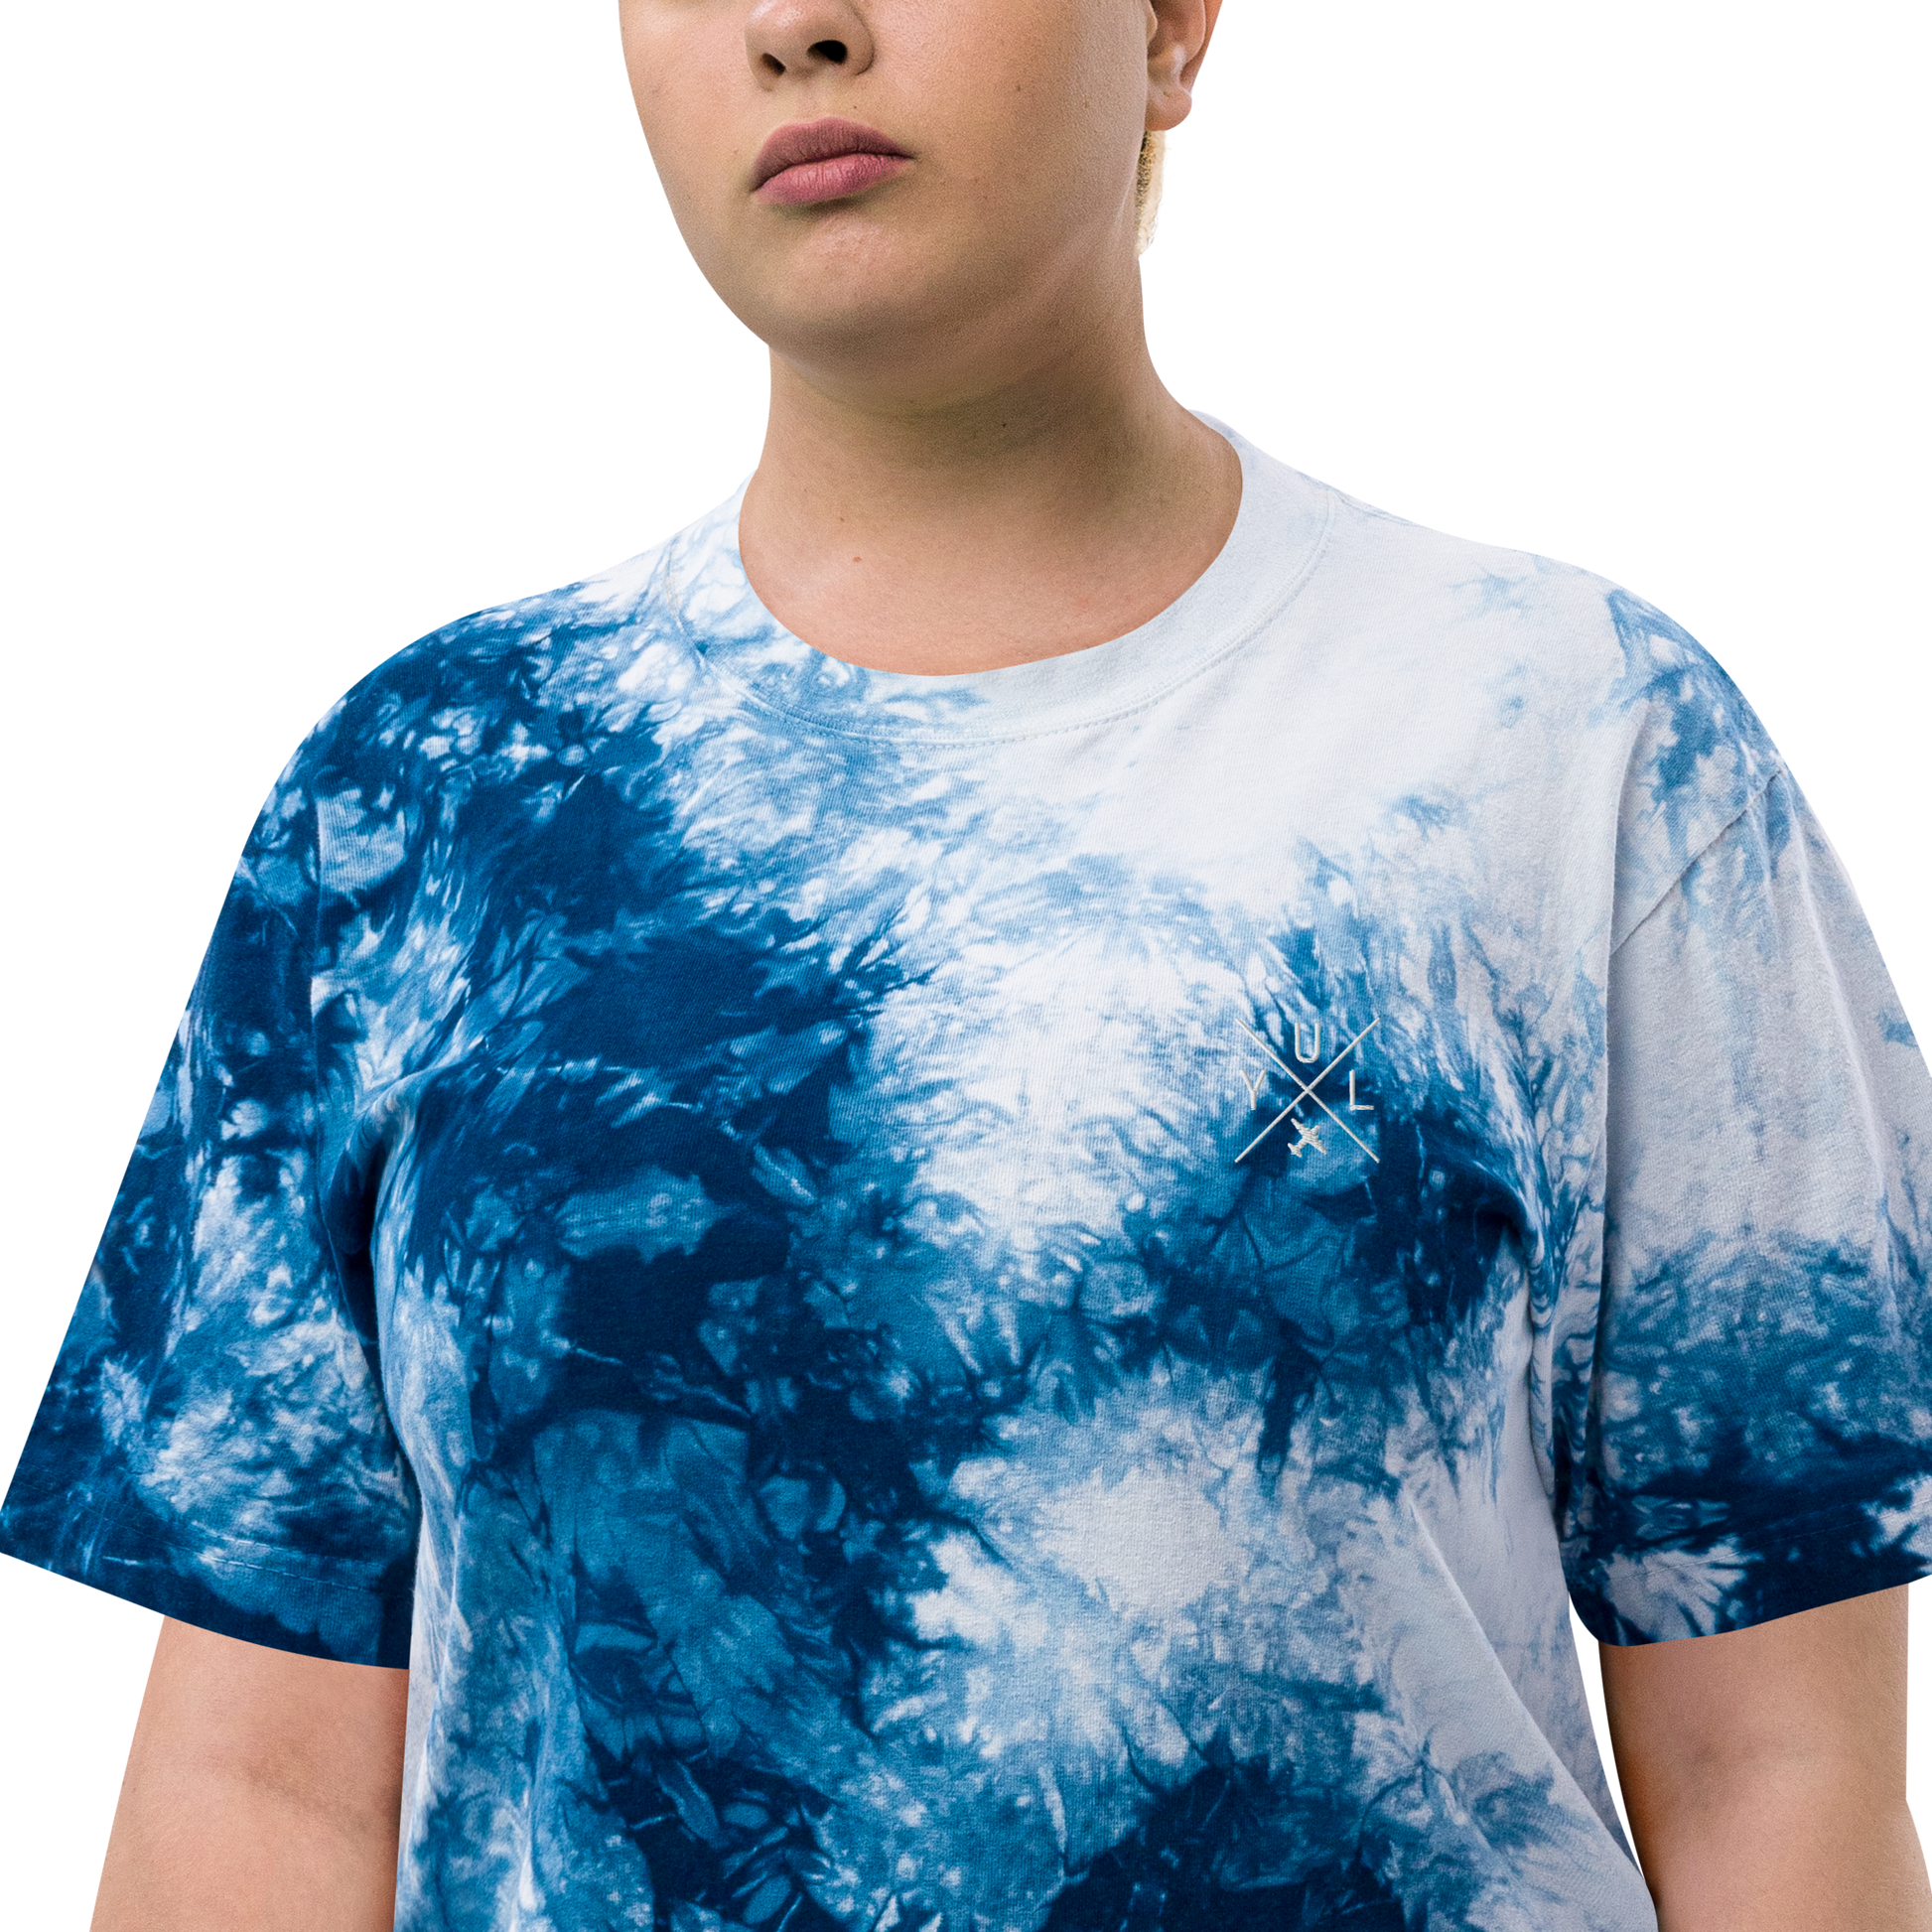 YHM Designs - YUL Montreal Oversized Tie-Dye T-Shirt - Crossed-X Design with Airport Code and Vintage Propliner - White Embroidery - Image 10